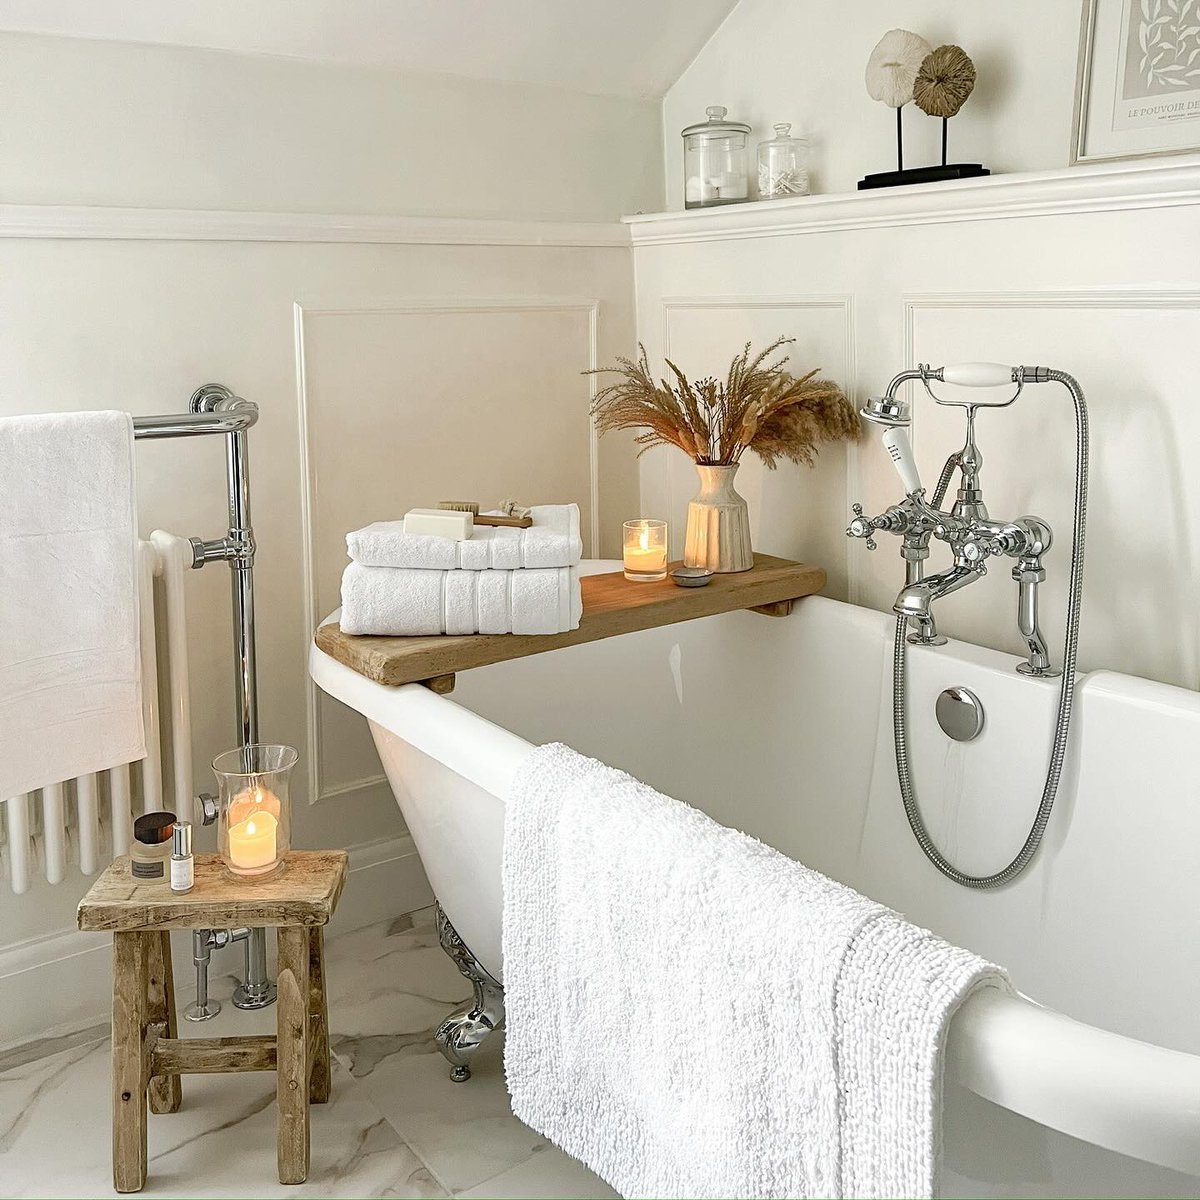 We love this fresh and clean aesthetic. The warm neutral tones of this stylish bathroom, finished with fluffy towels and cosy essentials makes it the perfect place to unwind and relax after a long day 🧖‍♀️ 🫧 #homedecor #homeinspo #bathrooms